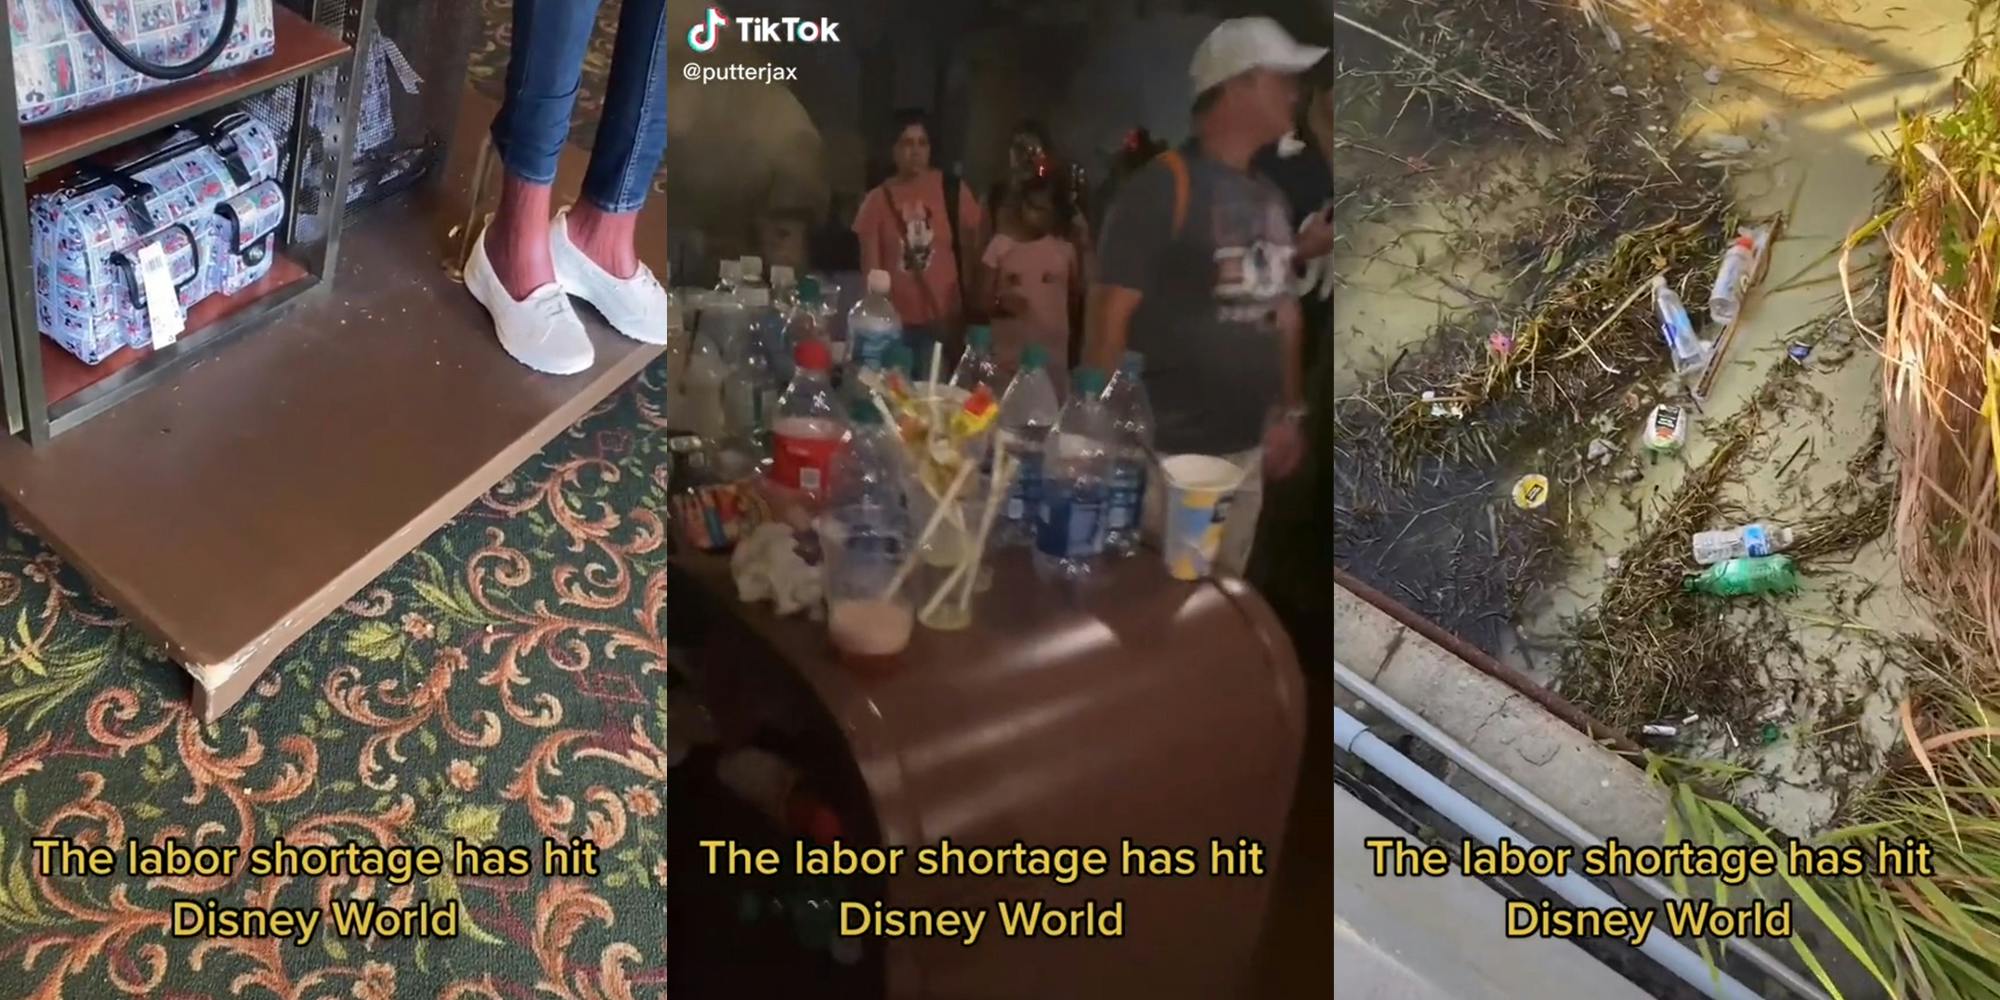 Feet standing on scuffed platform (l) visitors walking past an overflowing garbage can (c) trash on beach (r) all with caption "The labor shortage has hit Disney World"